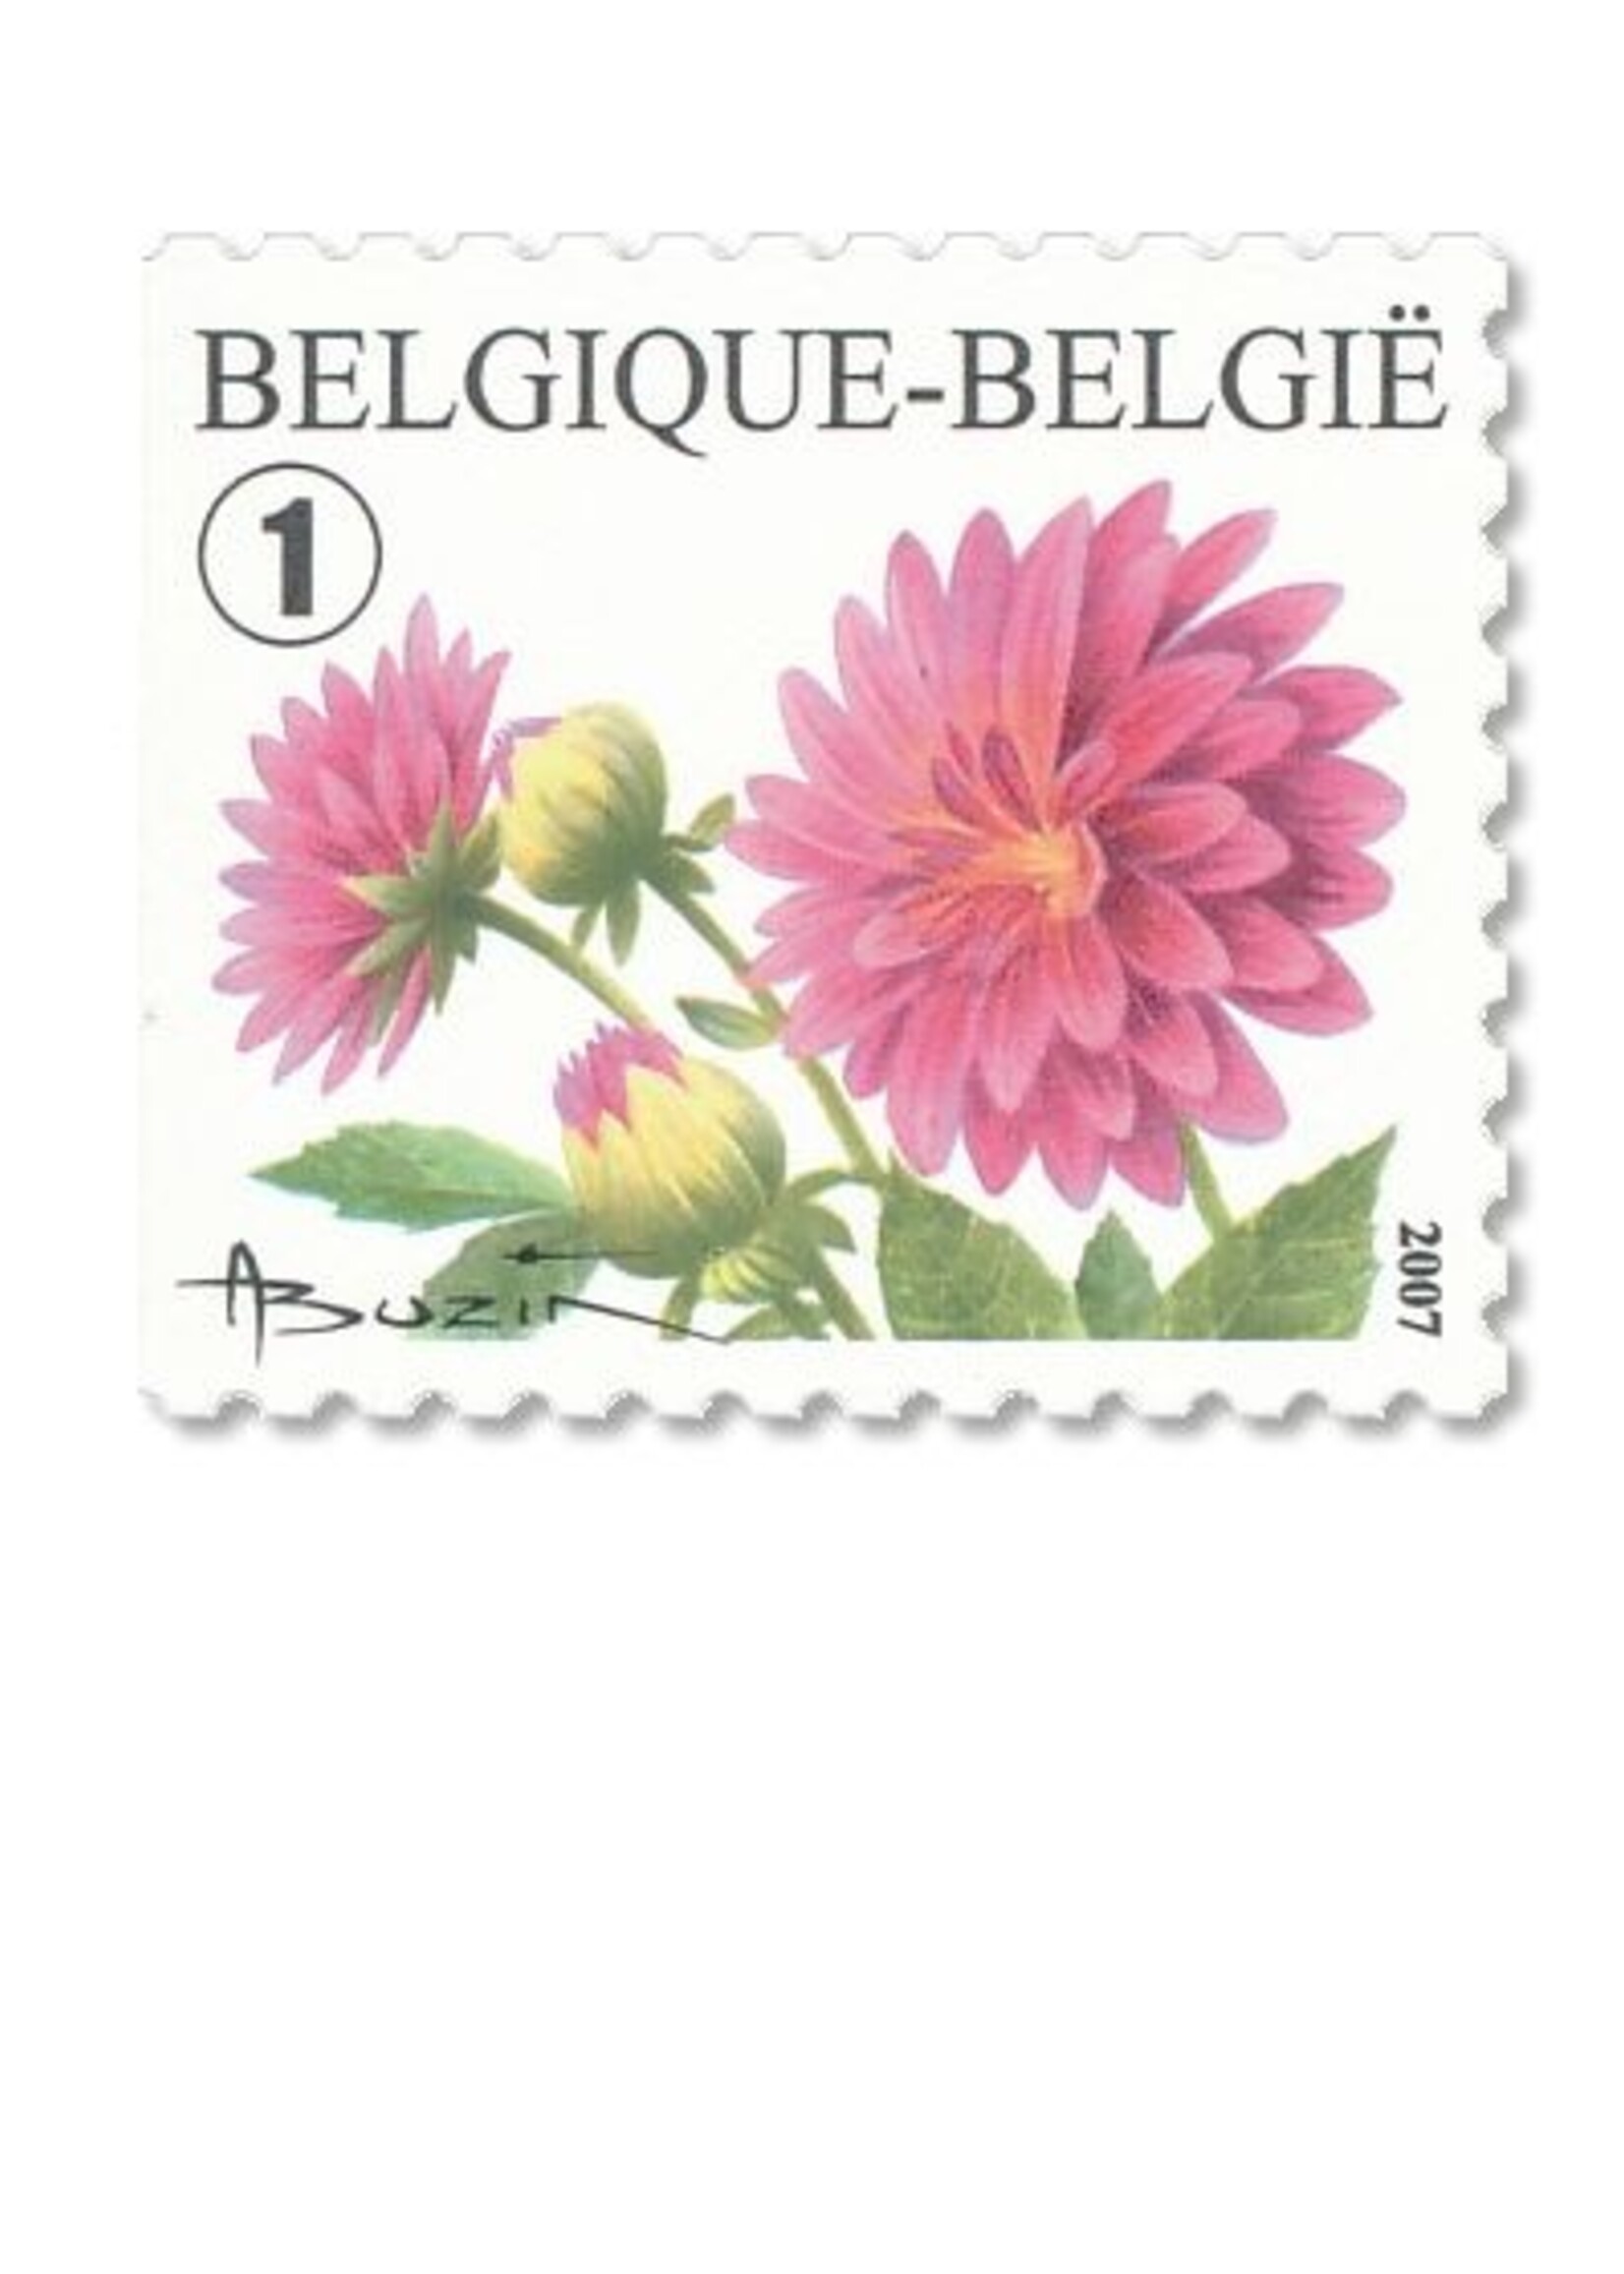 Theme Nature 1 - Booklet with 10 self-adhesive stamps - Rate 1, Belgium